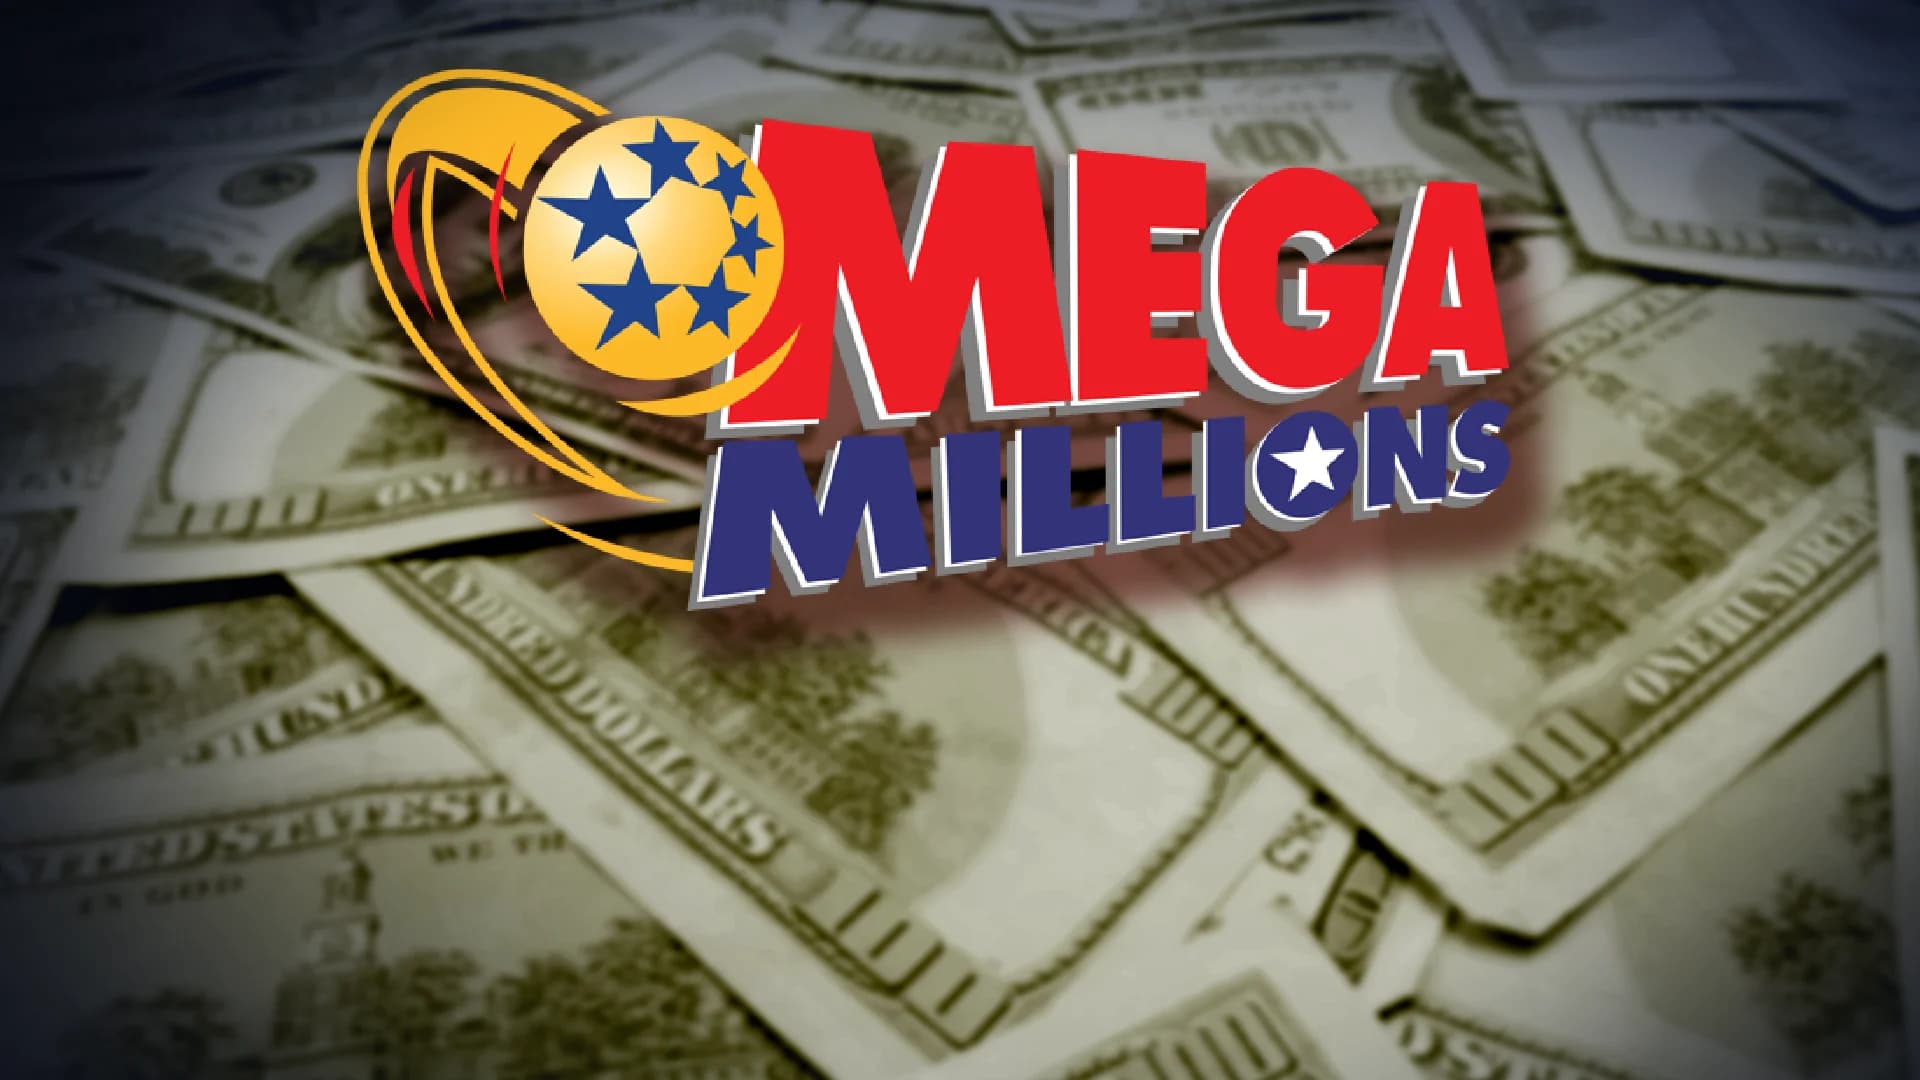 Check your tickets! 2 Mega Millions winning tickets worth $1 million sold in New Jersey